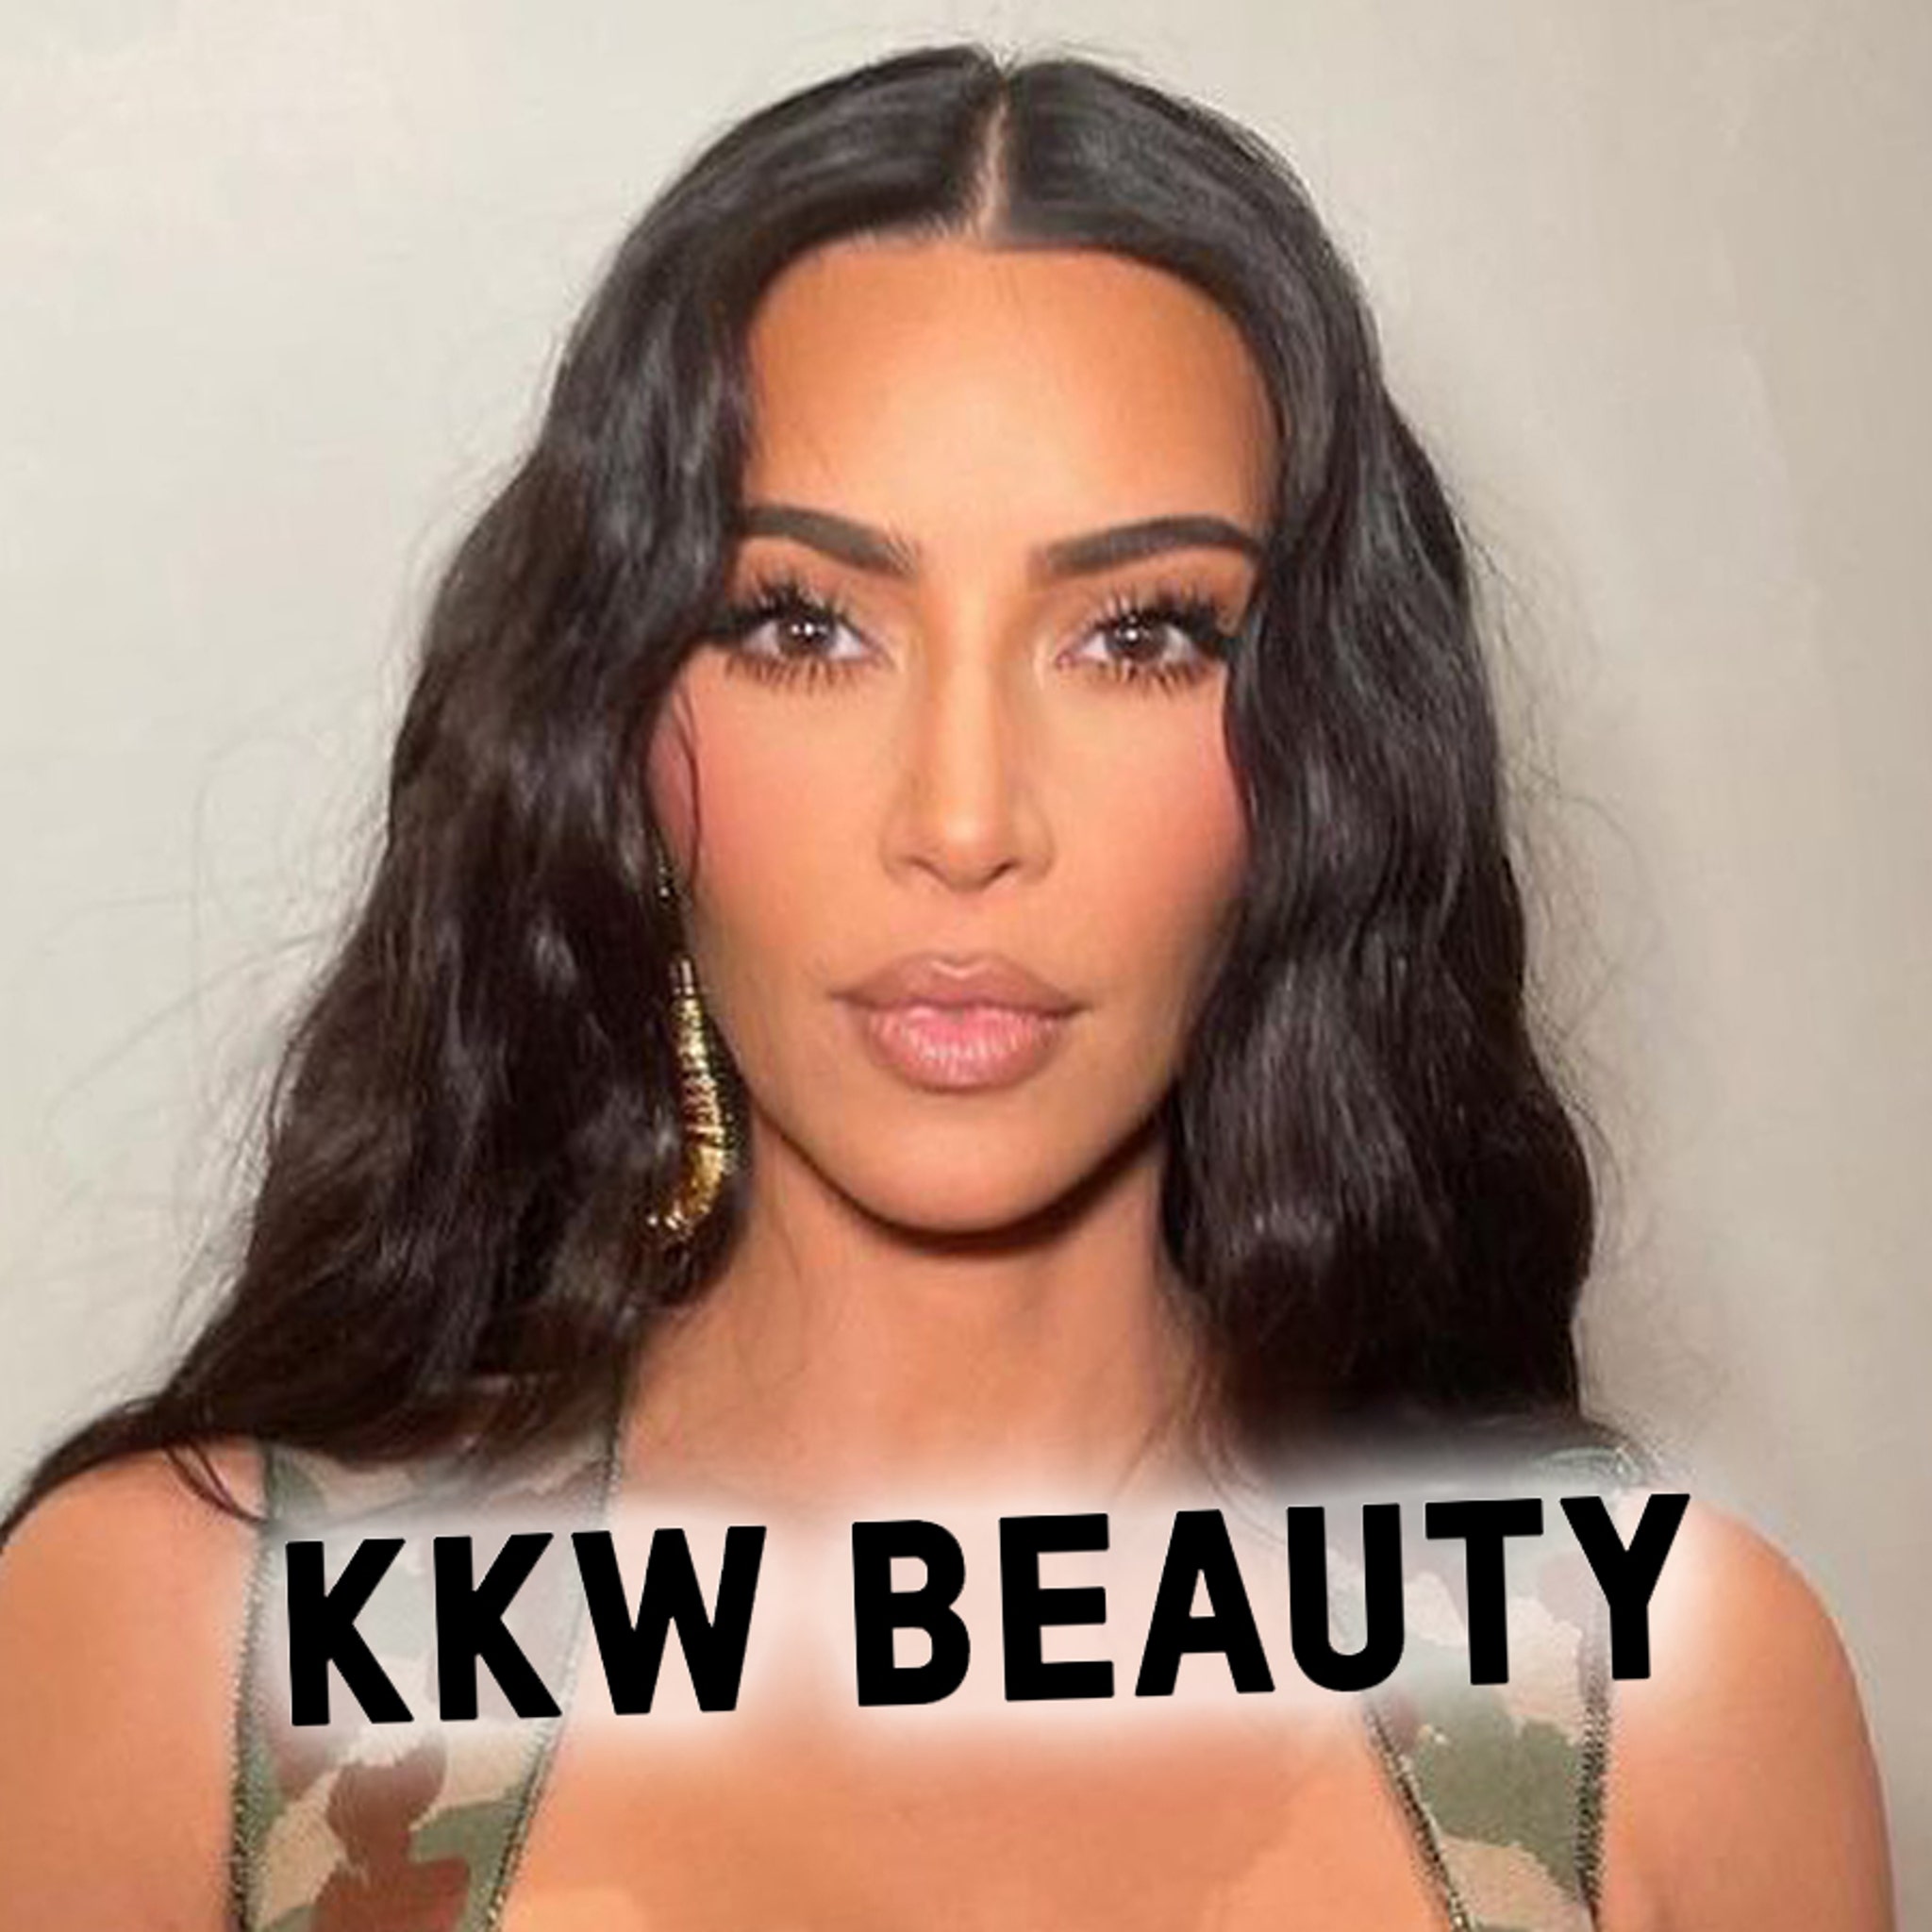 Kim Kardashian's KKW Beauty Brand Will Be No More, New Look on the Way